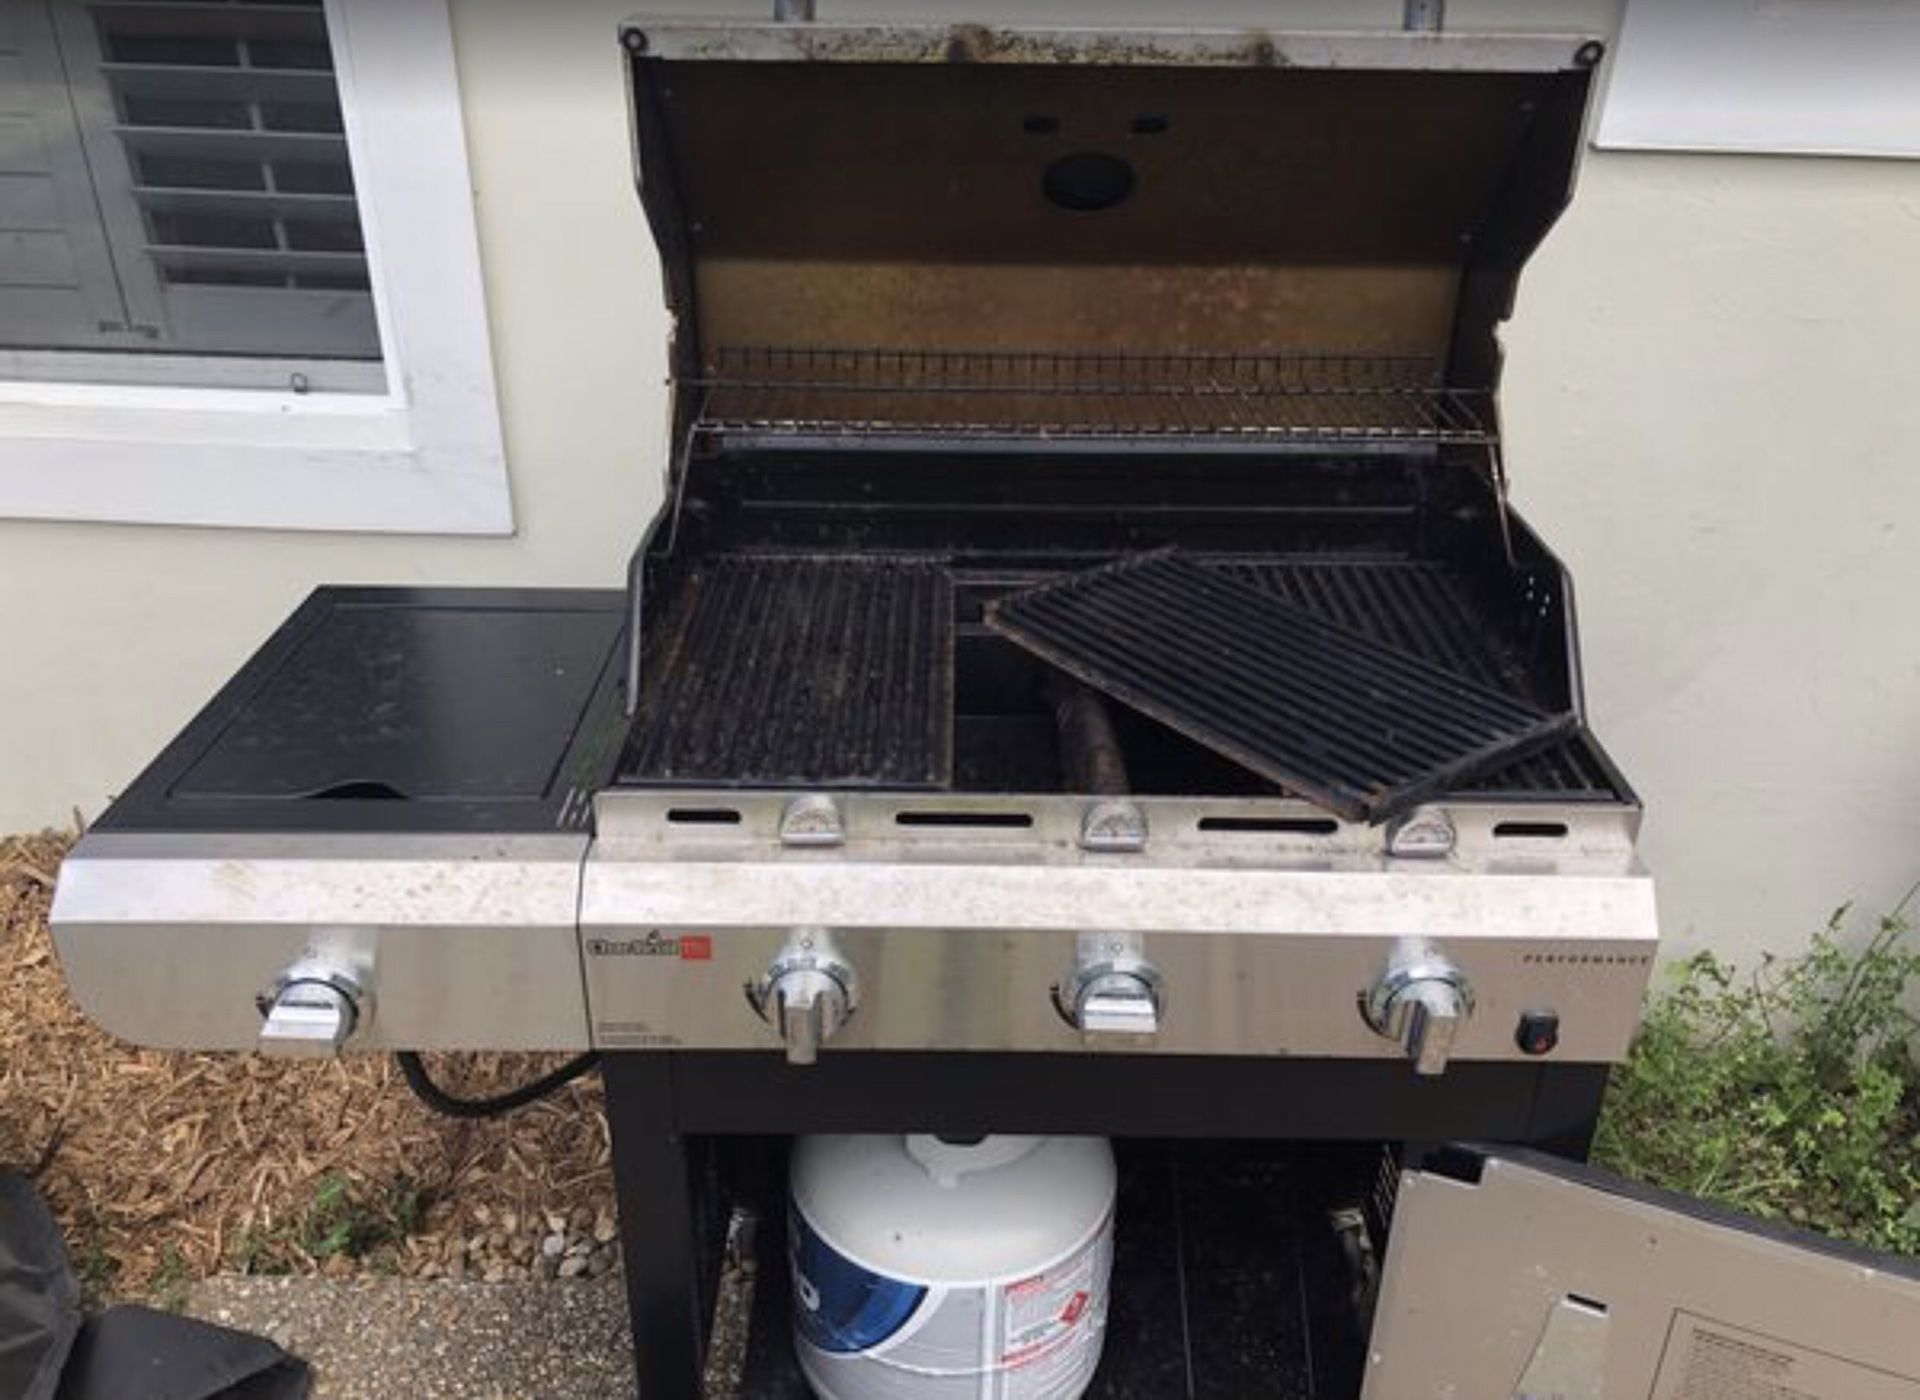 CharBroil Gas Grill